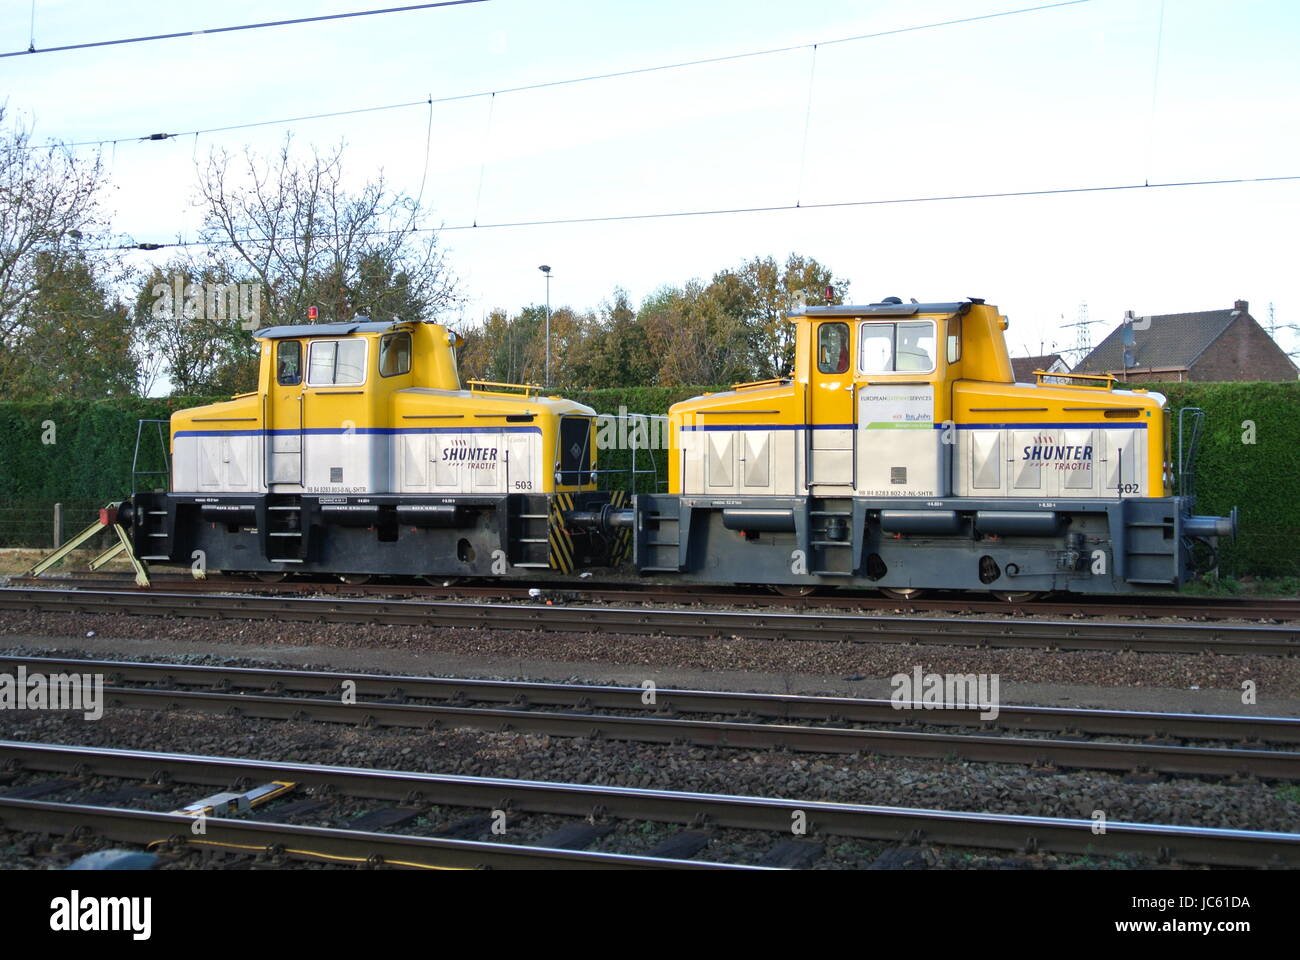 diesel shunters Tractie 502 and 503 in siding, Blerick, Venlo, Netherlands Stock Photo